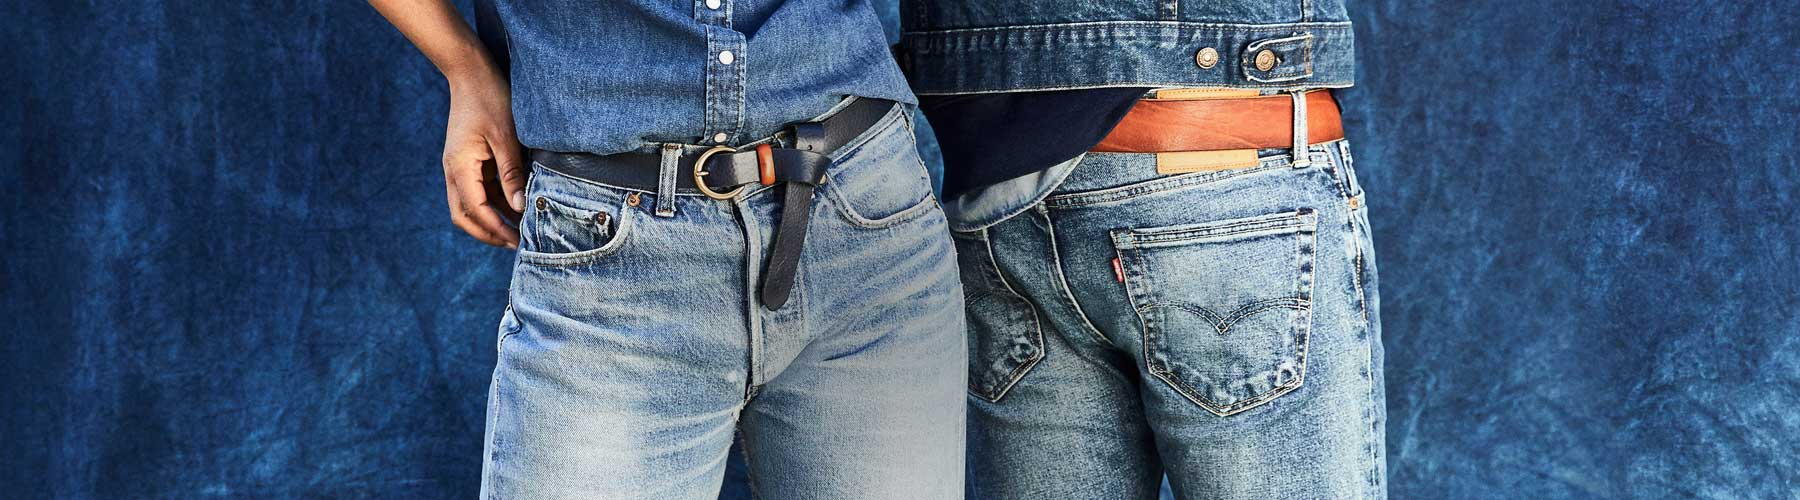 Bootcut Jeans Manufacturers in Delhi